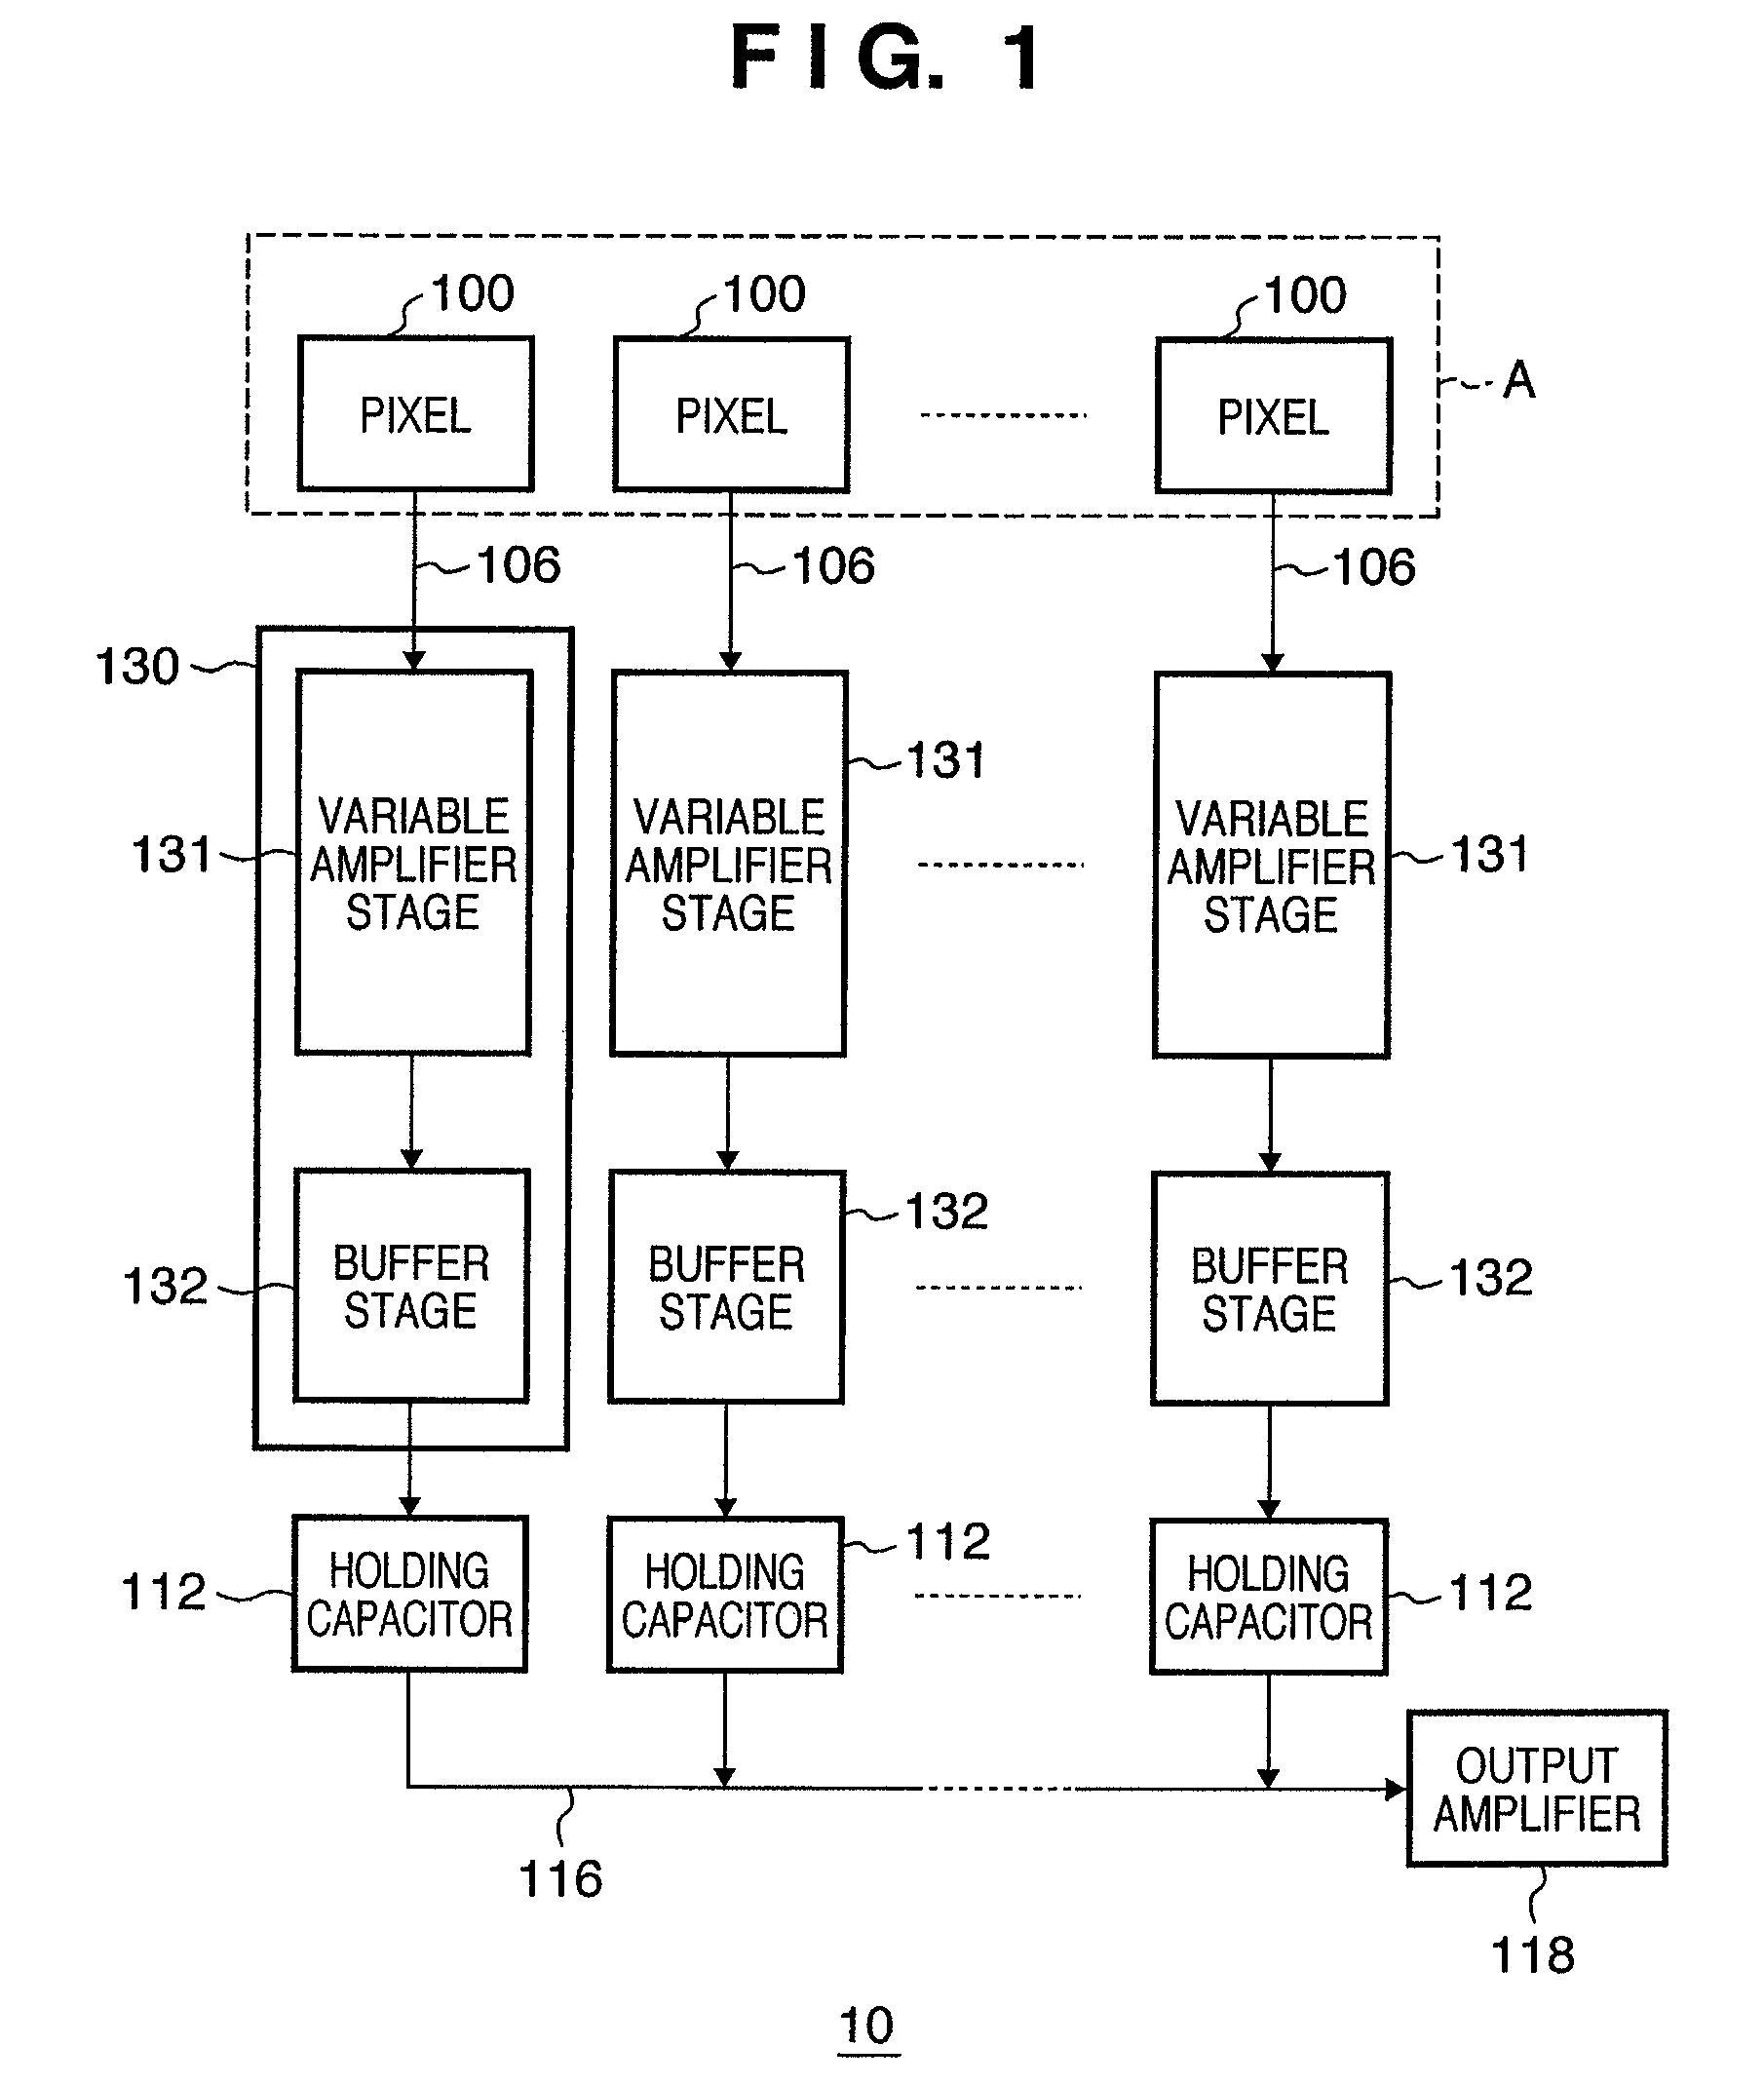 Photoelectric conversion device and image capturing device with variable amplifier for amplifying signal by a selected gain